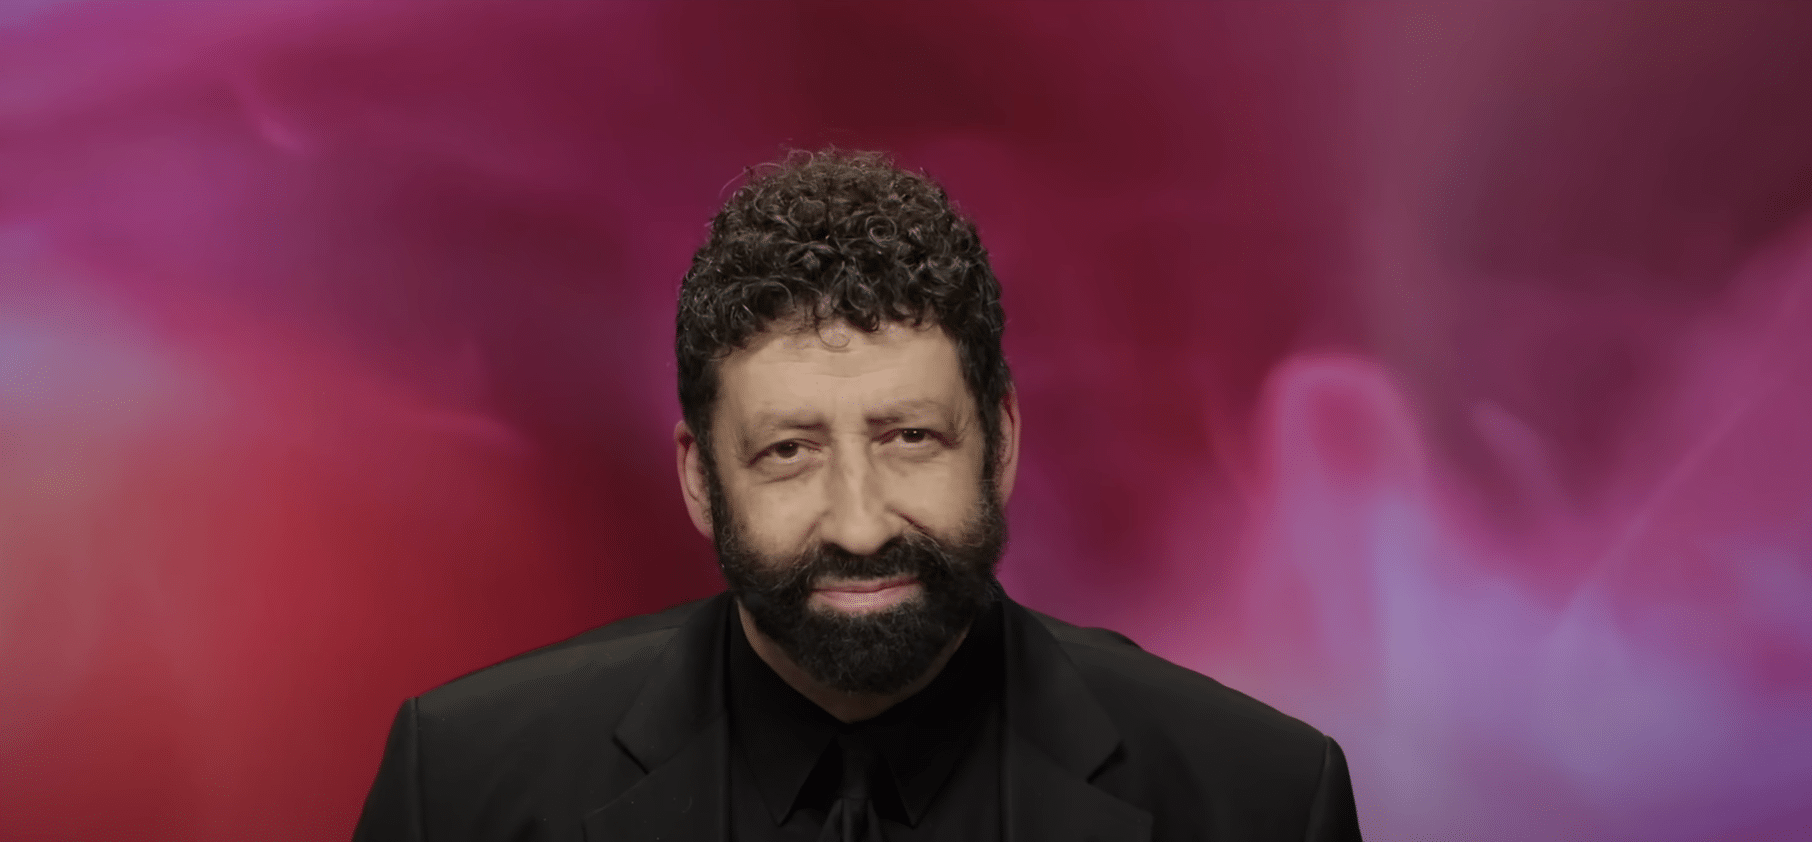 (WATCH) Jonathan Cahn claims that new ‘Barbie’ movie is an echo of an ancient pagan sex goddess